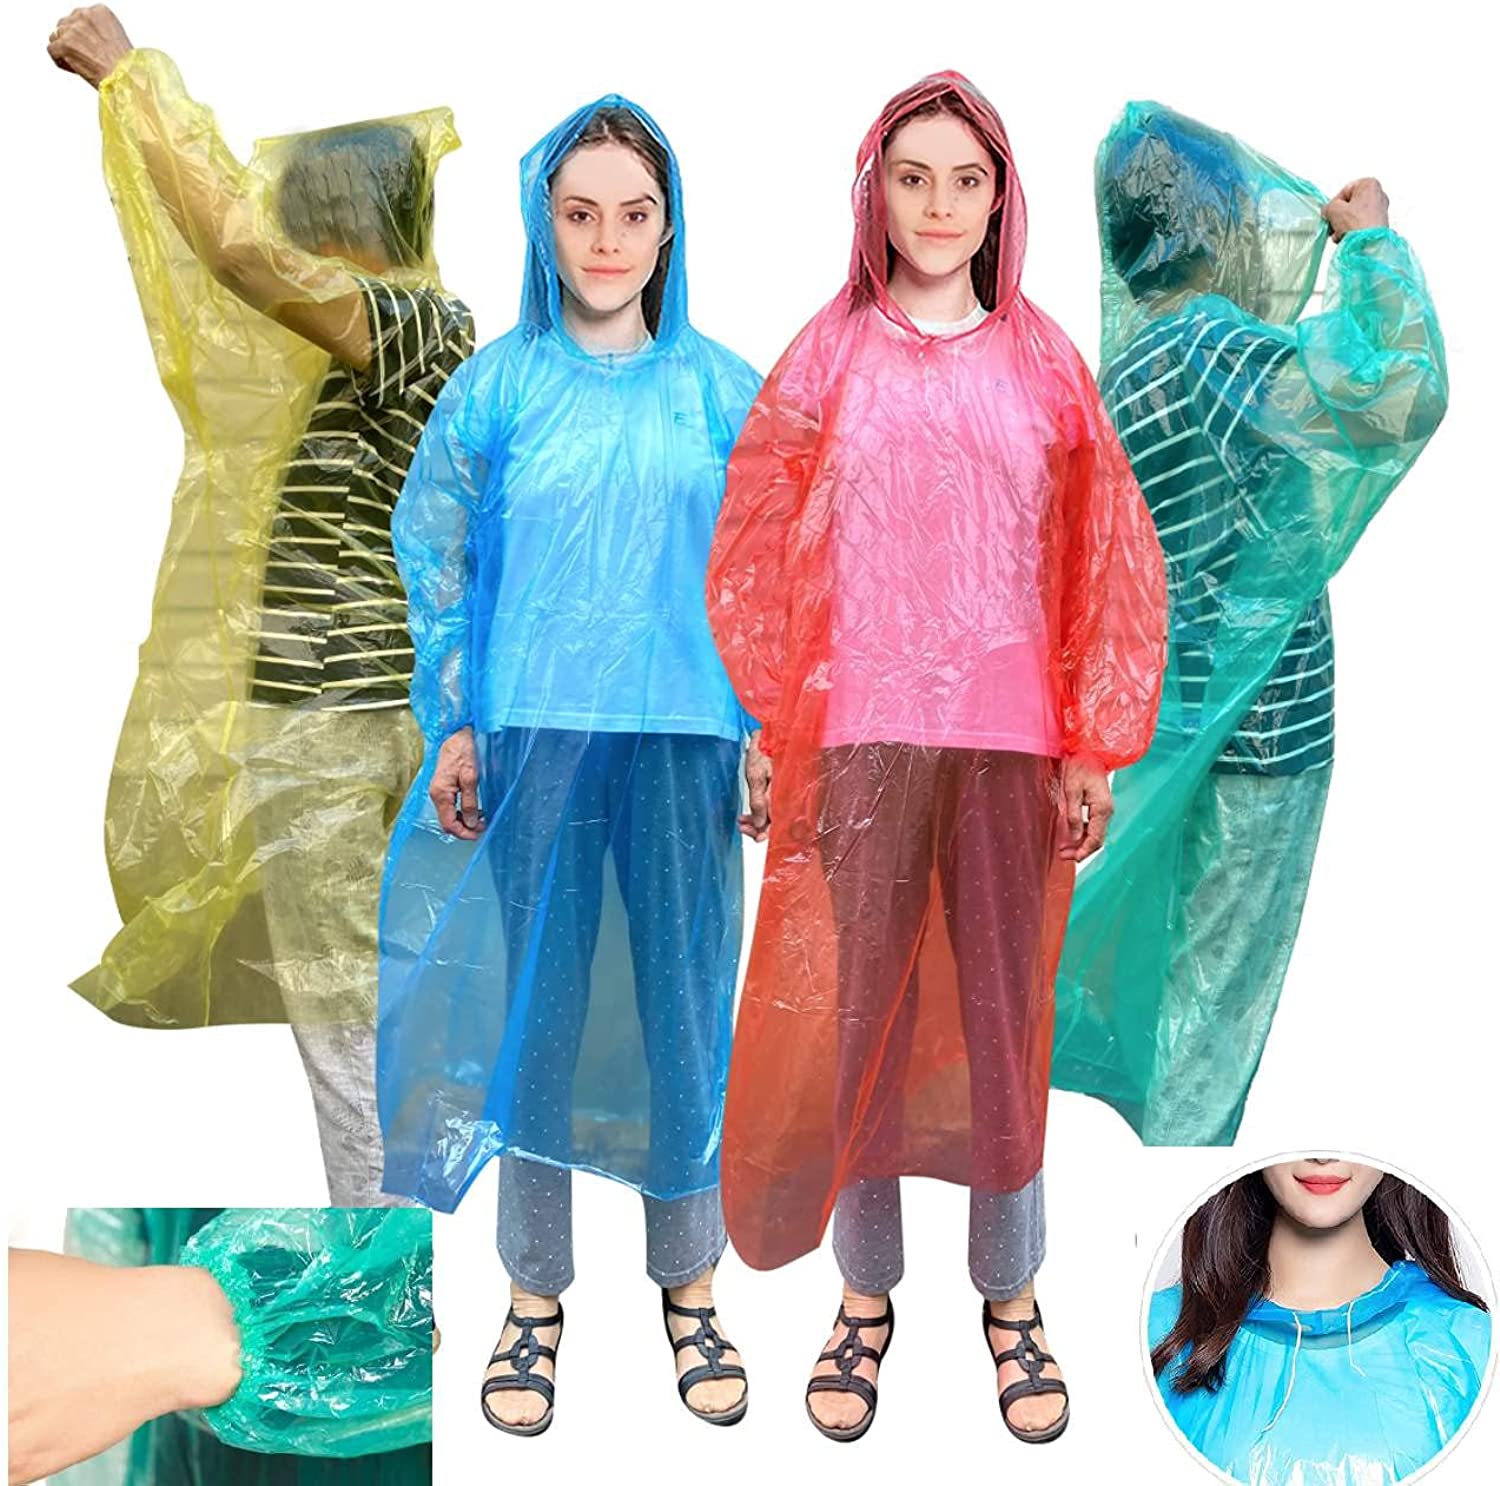 Rain Ponchos for Adults Disposable Poncho for Disney World 20 Pack Panchos Rain Adult Bulk Emergency Waterproof Plastic Raincoat with Hood Lightweight Pocket Camping Throw Away Men Women Compact Pncho